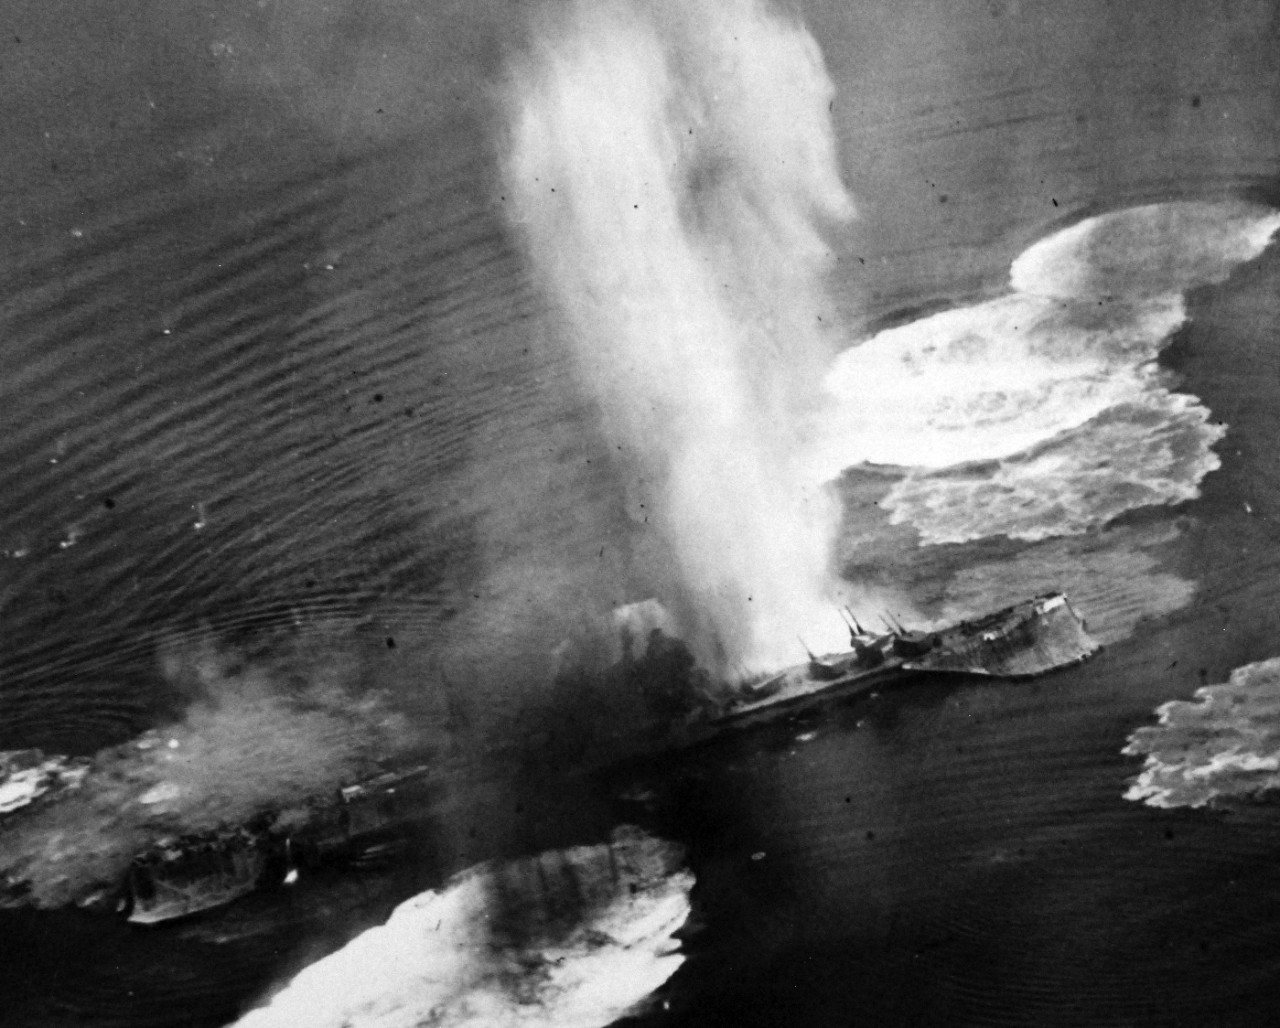 80-G-490148:   Raids on Japanese Home Islands, July  24, 1945.   Japanese cruiser Tone under air attack near Kure, July 24, 1945.  Photograph by USS Shangri-La (CV-38) aircraft.  Note the camouflage nets hanging over its sides.   U.S. Navy Photograph, now in the collections of the National Archives. (2015/12/08). 